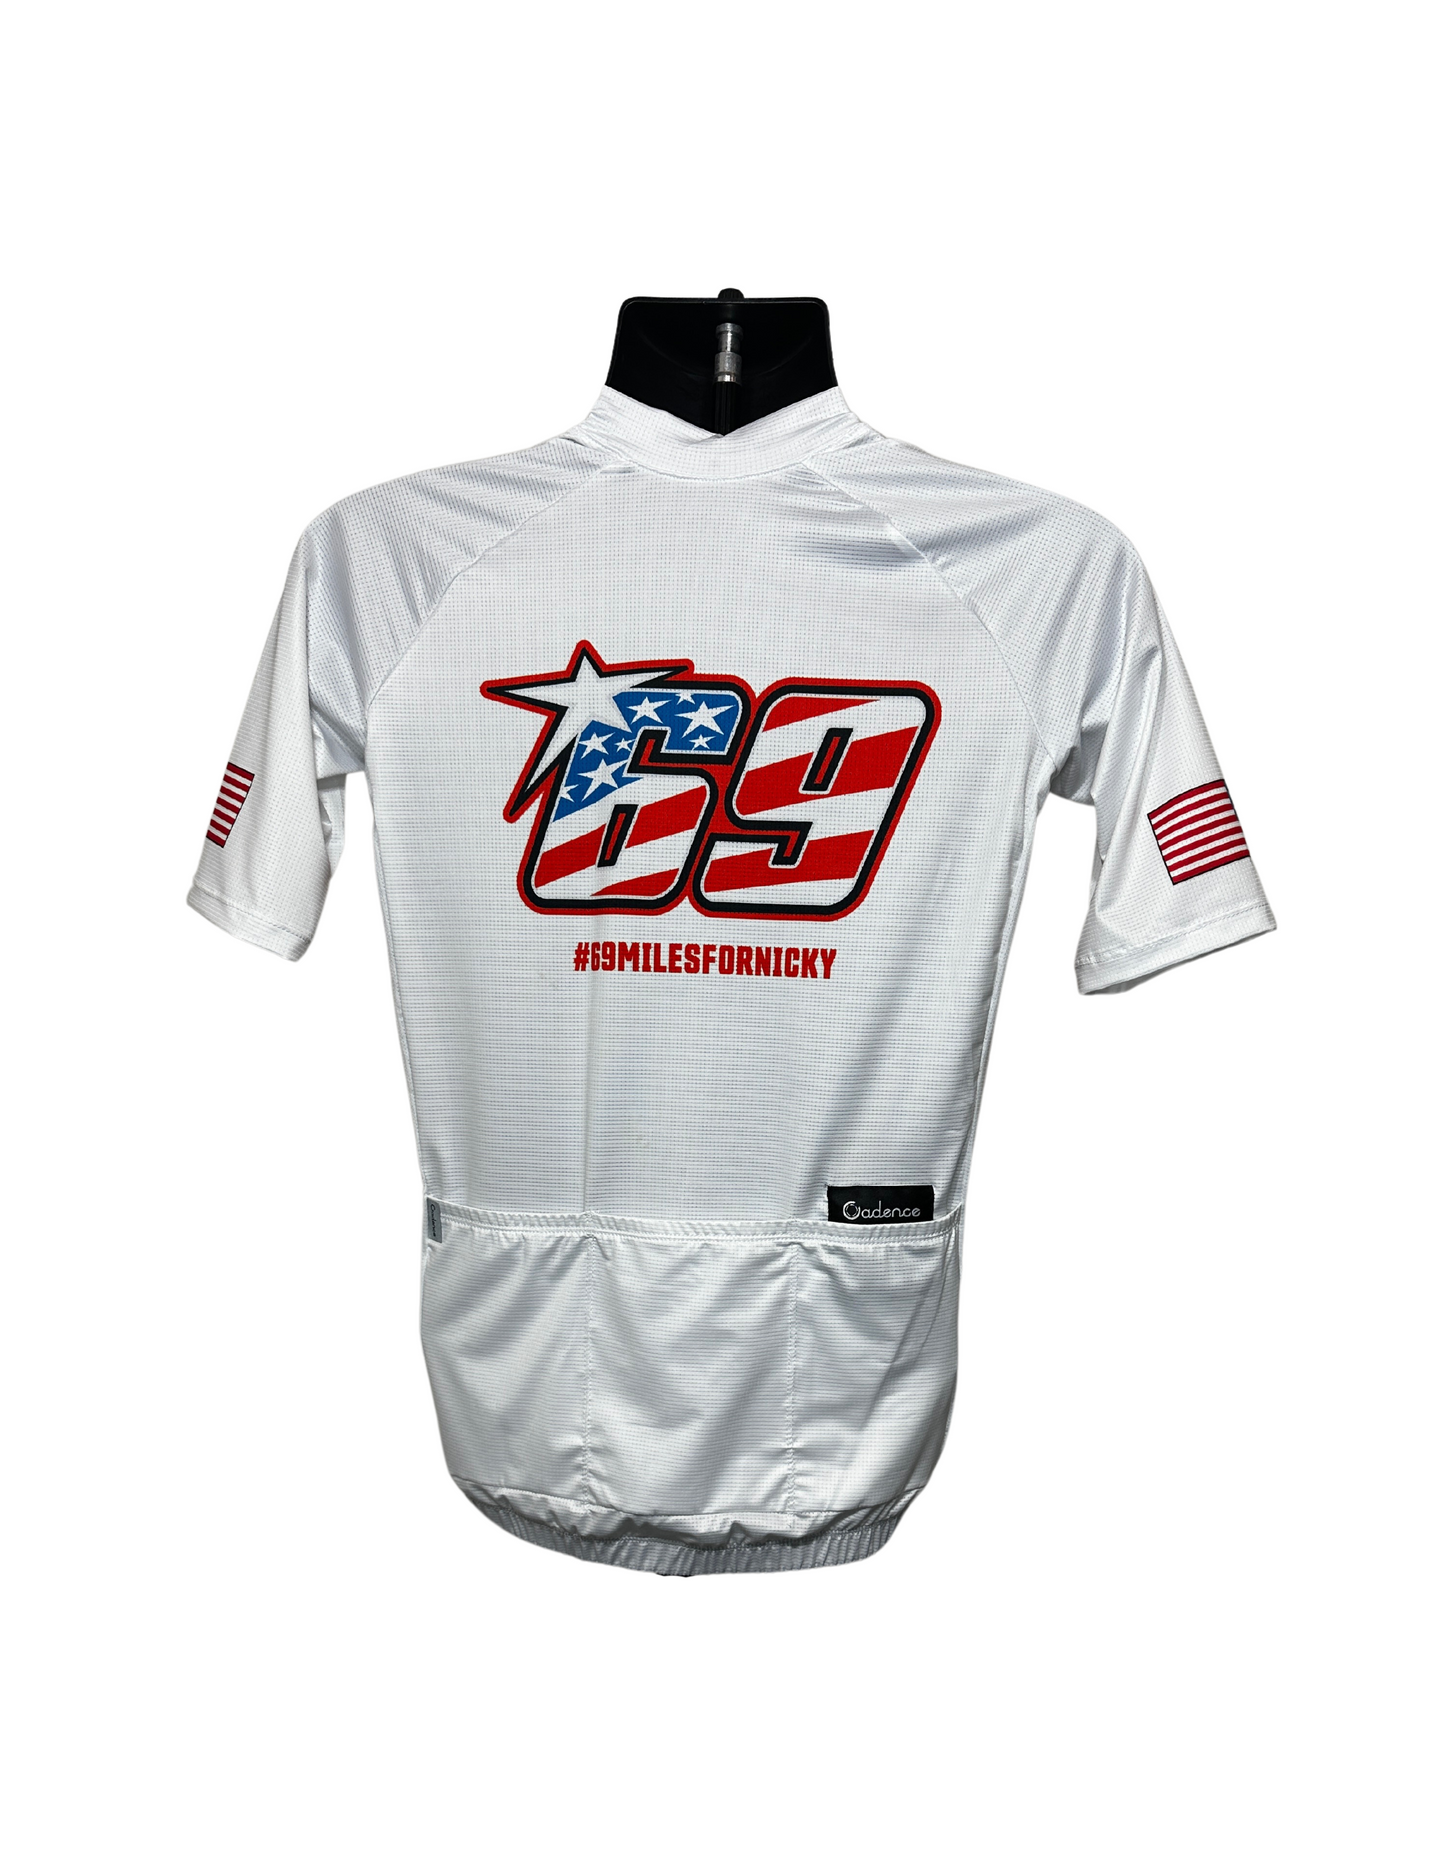 Limited Edition “69 Miles” Nicky Hayden Men’s Cycling Jersey 2023